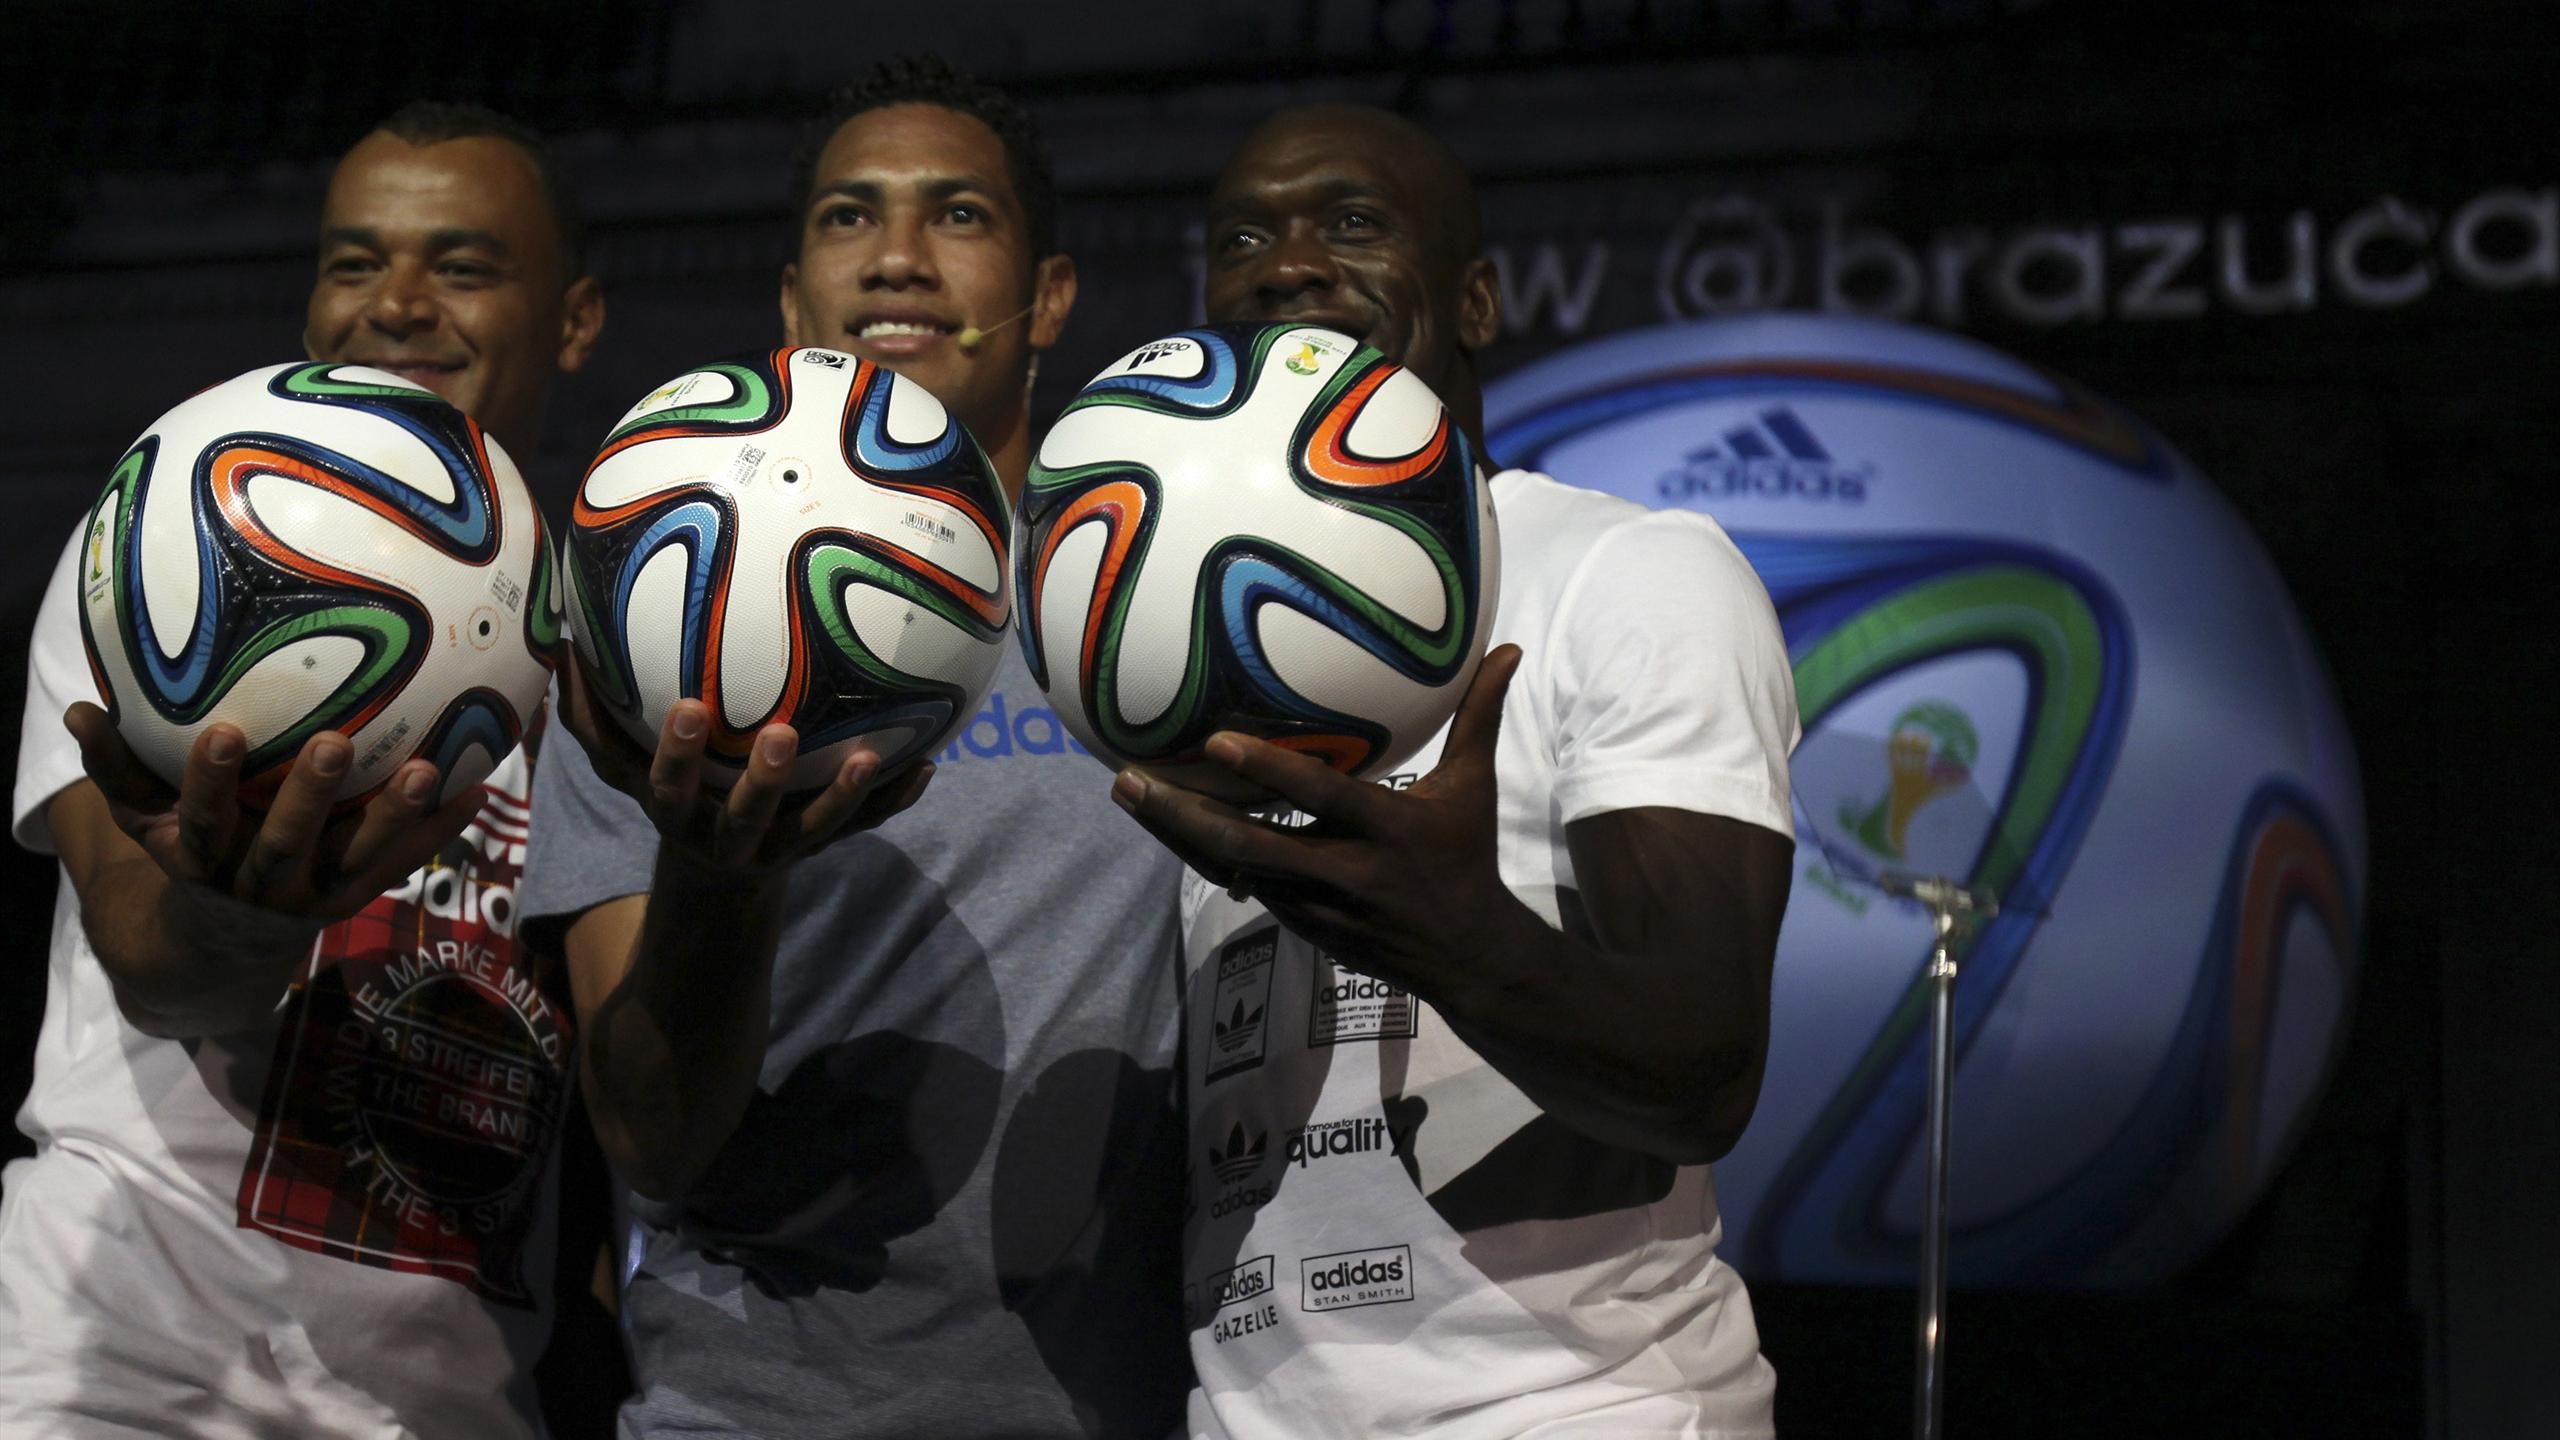 World Cup's Brazuca ball rated more stable than Jabulani